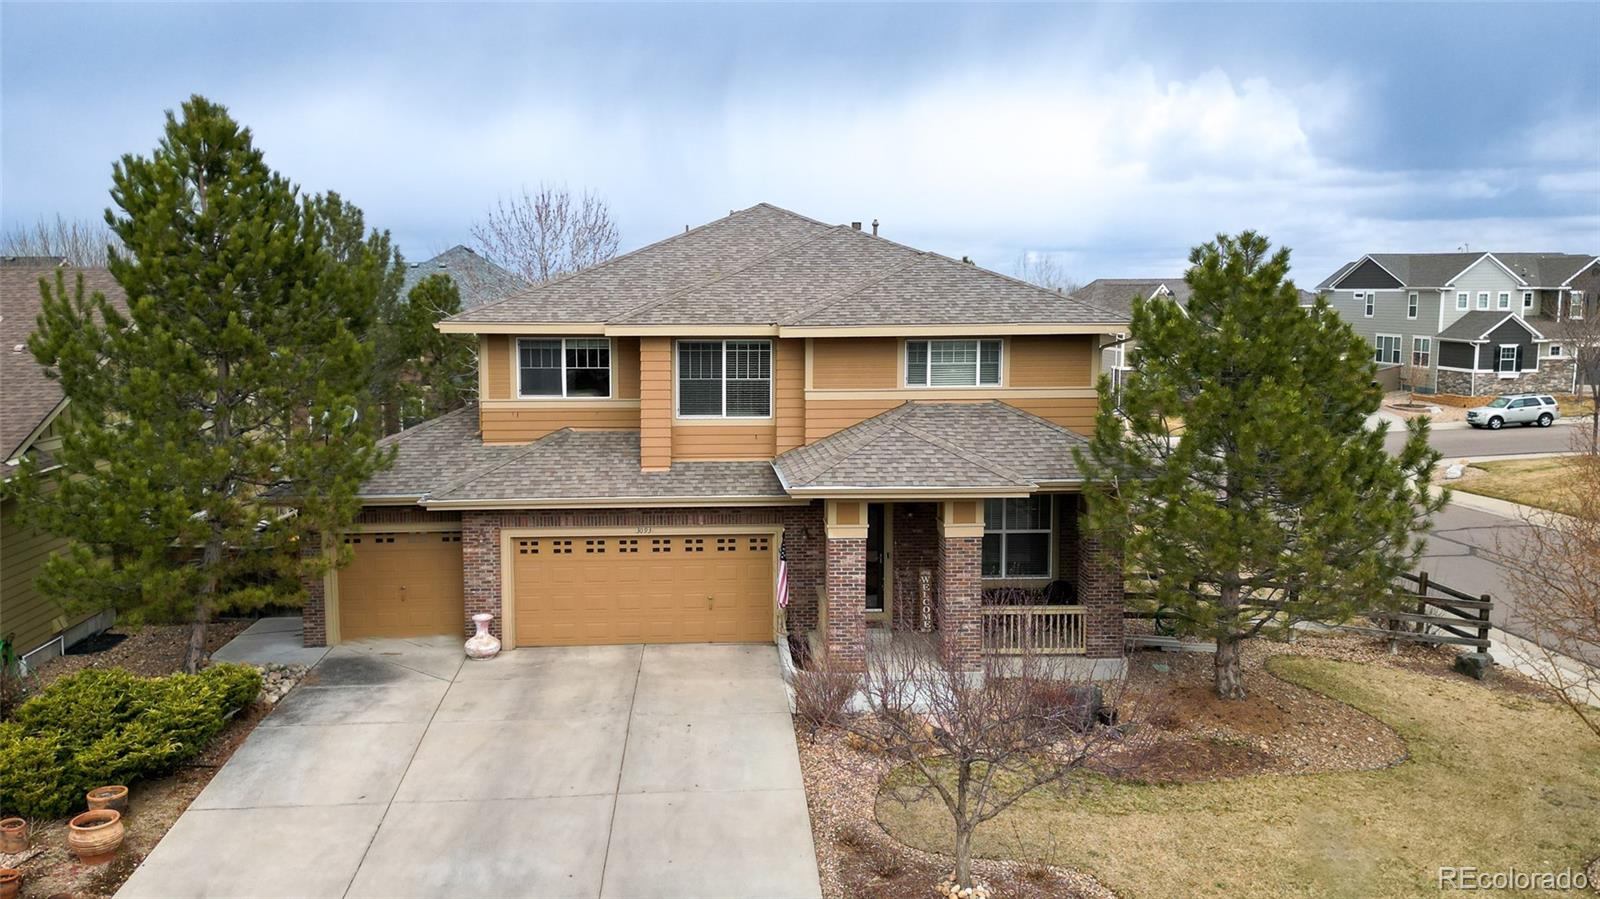 3093 E 143rd Place, thornton MLS: 7080548 Beds: 4 Baths: 4 Price: $824,900